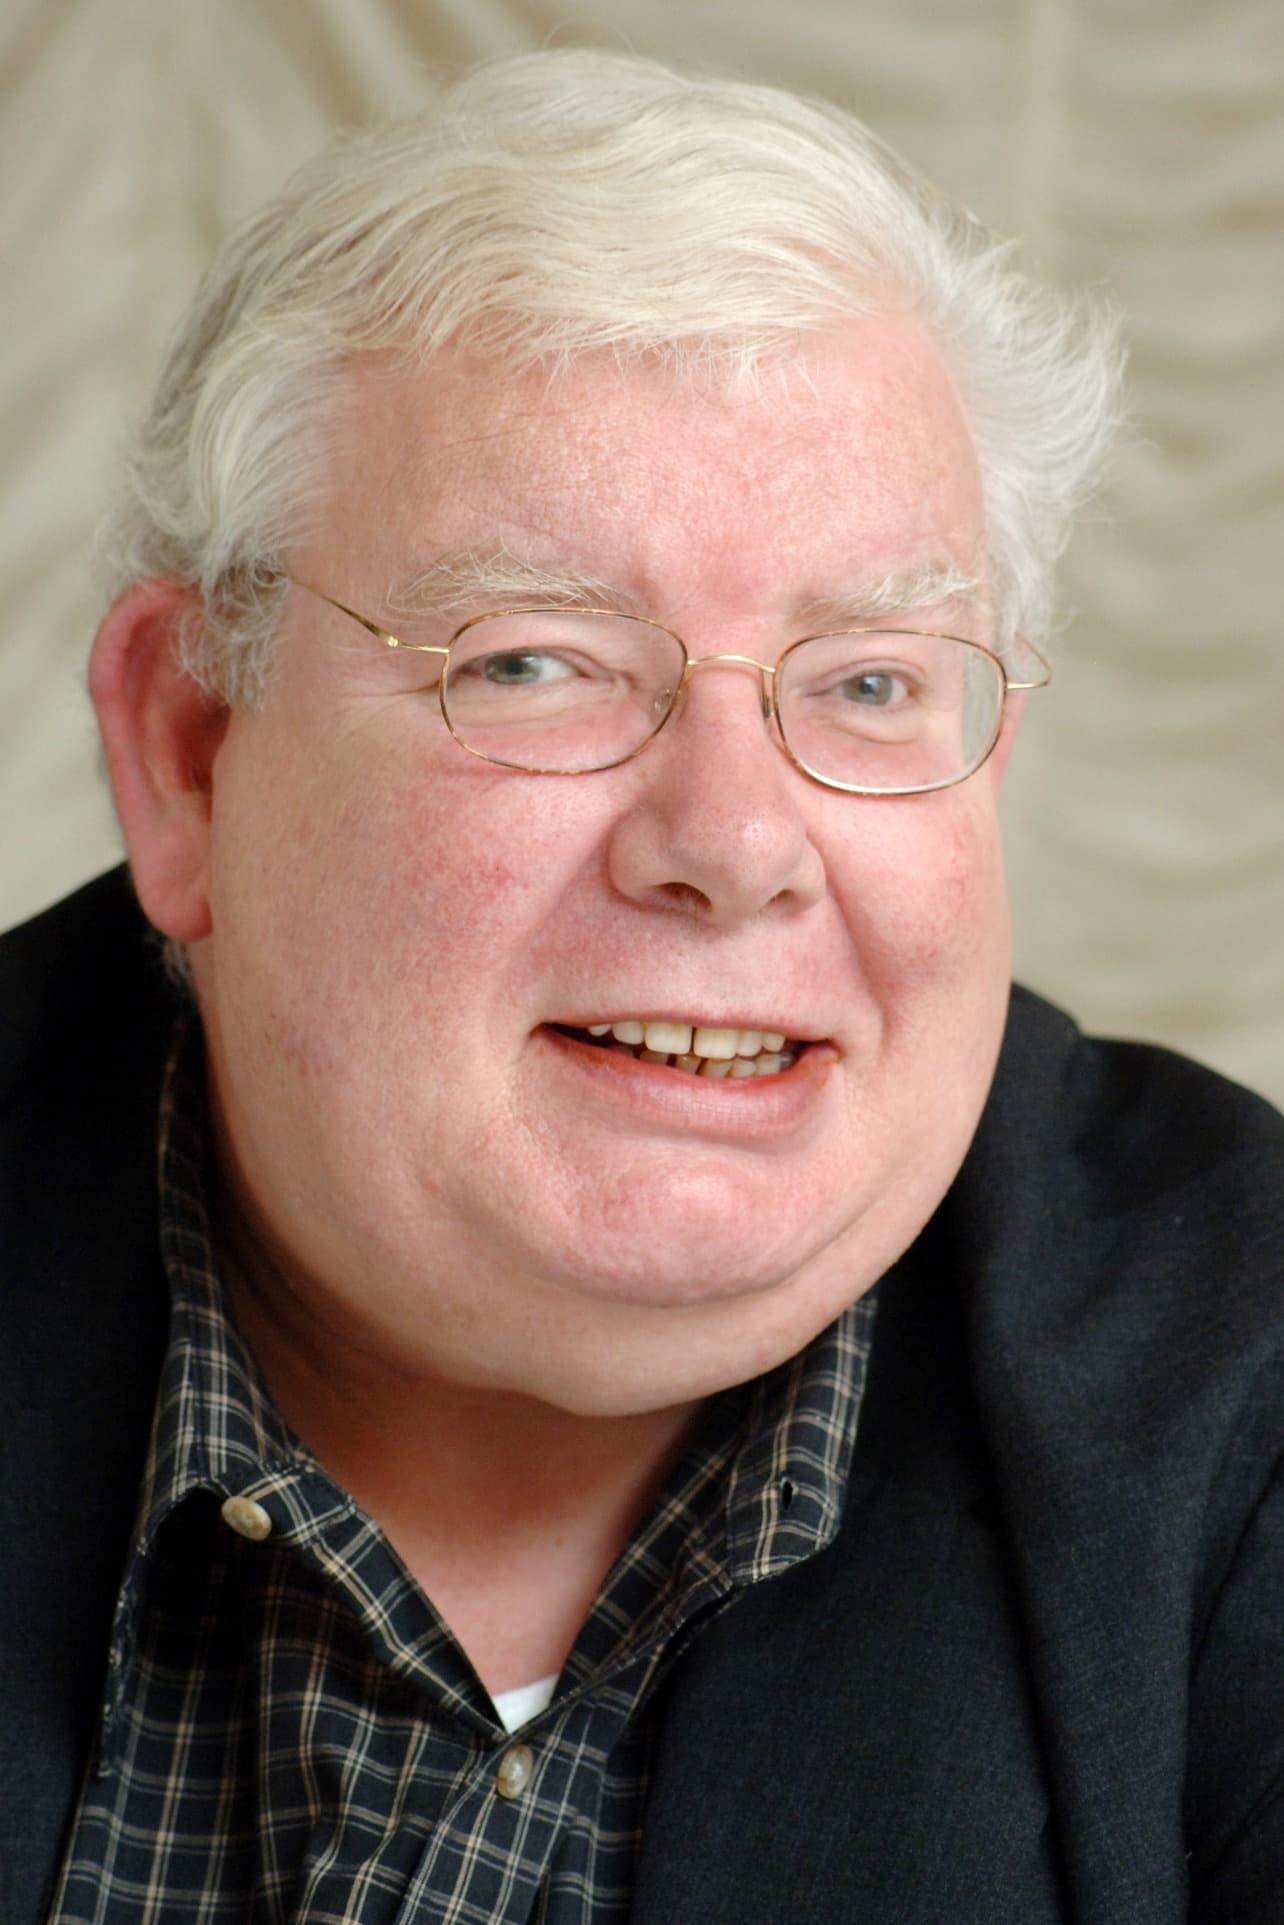 Richard Griffiths | Lawyer in Play (uncredited)